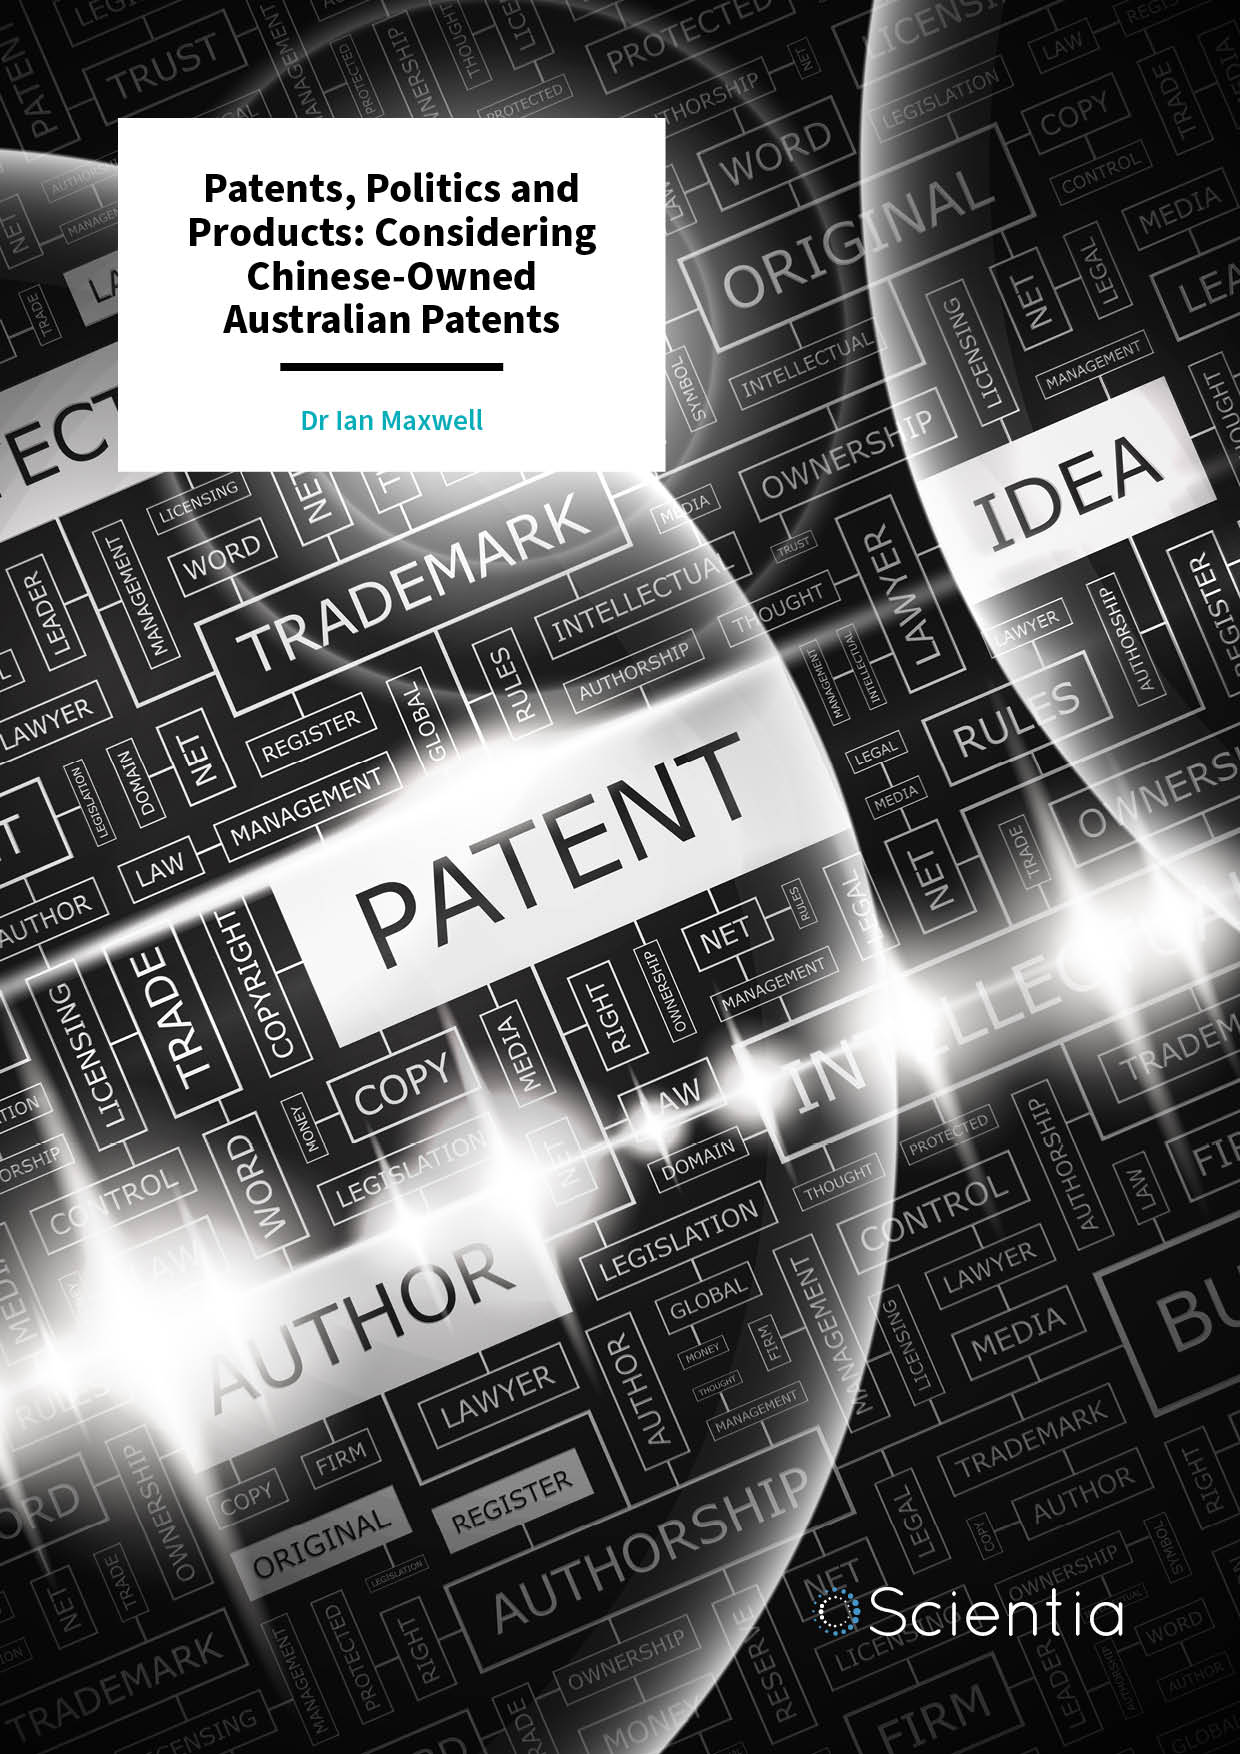 Dr Ian Maxwell | Patents, Politics and Products: Considering Chinese-Owned Australian Patents